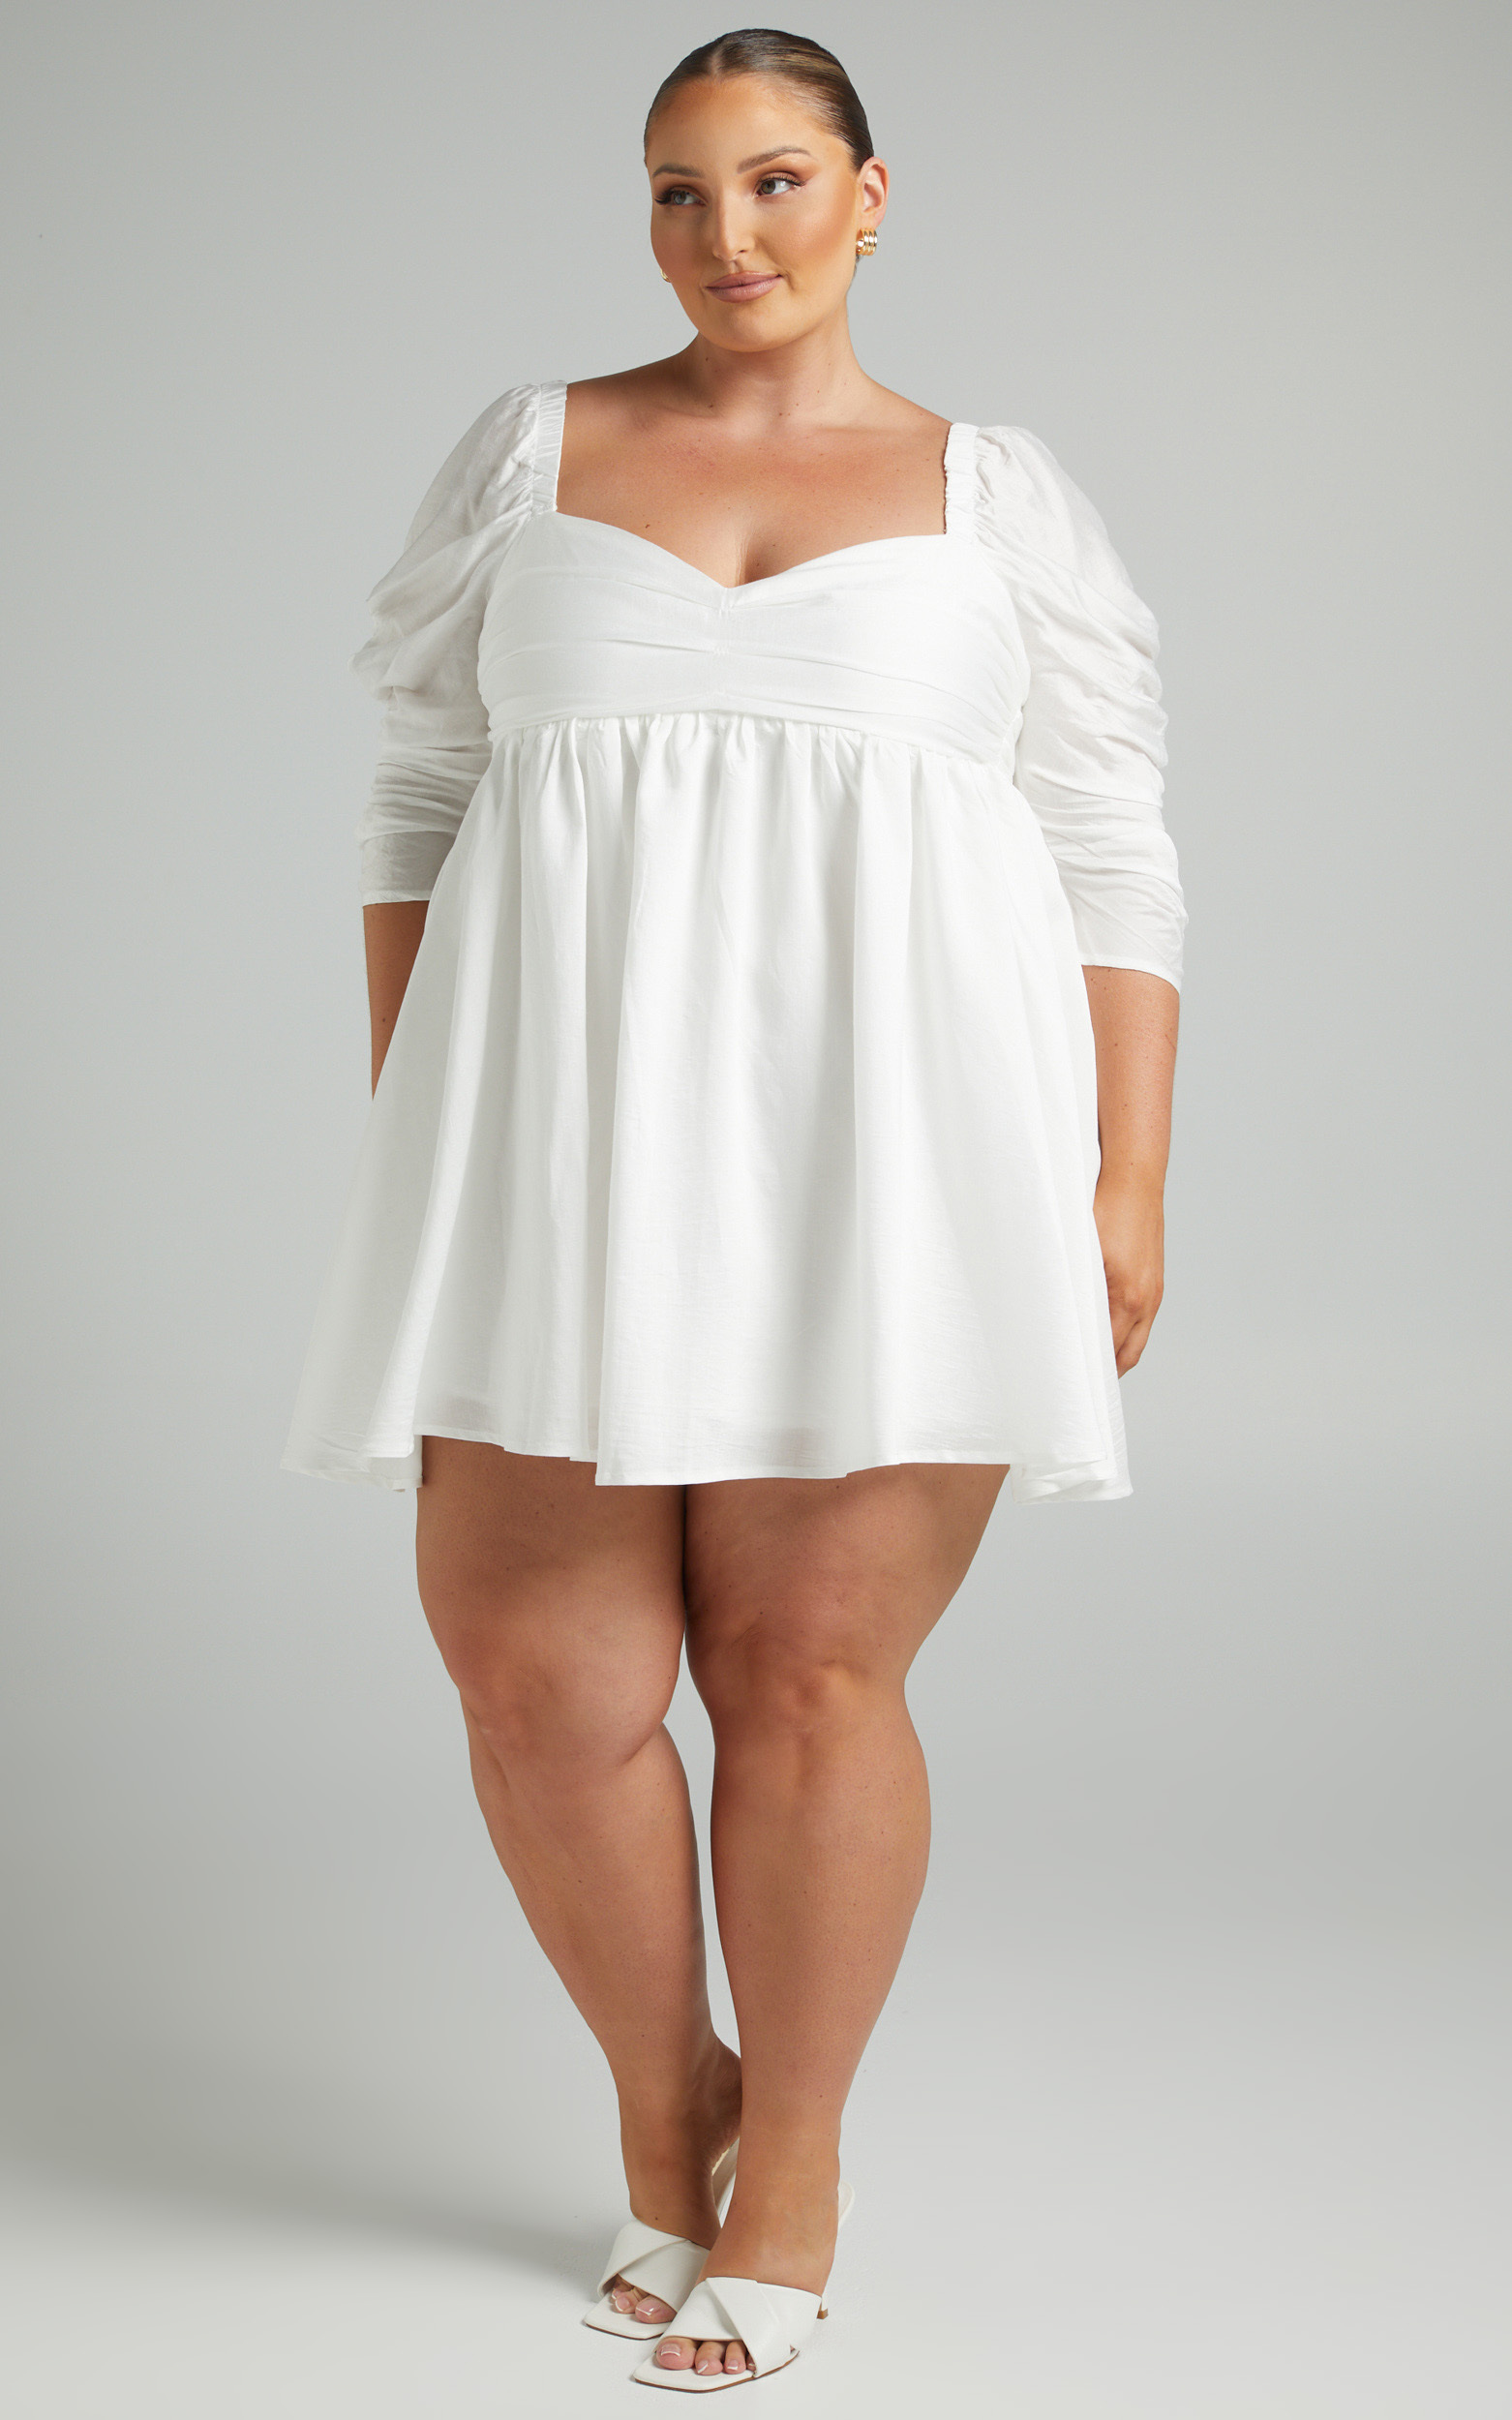 Gina Gathered Bodice Long Sleeves Mini Dress in White - 06, WHT1, hi-res image number null